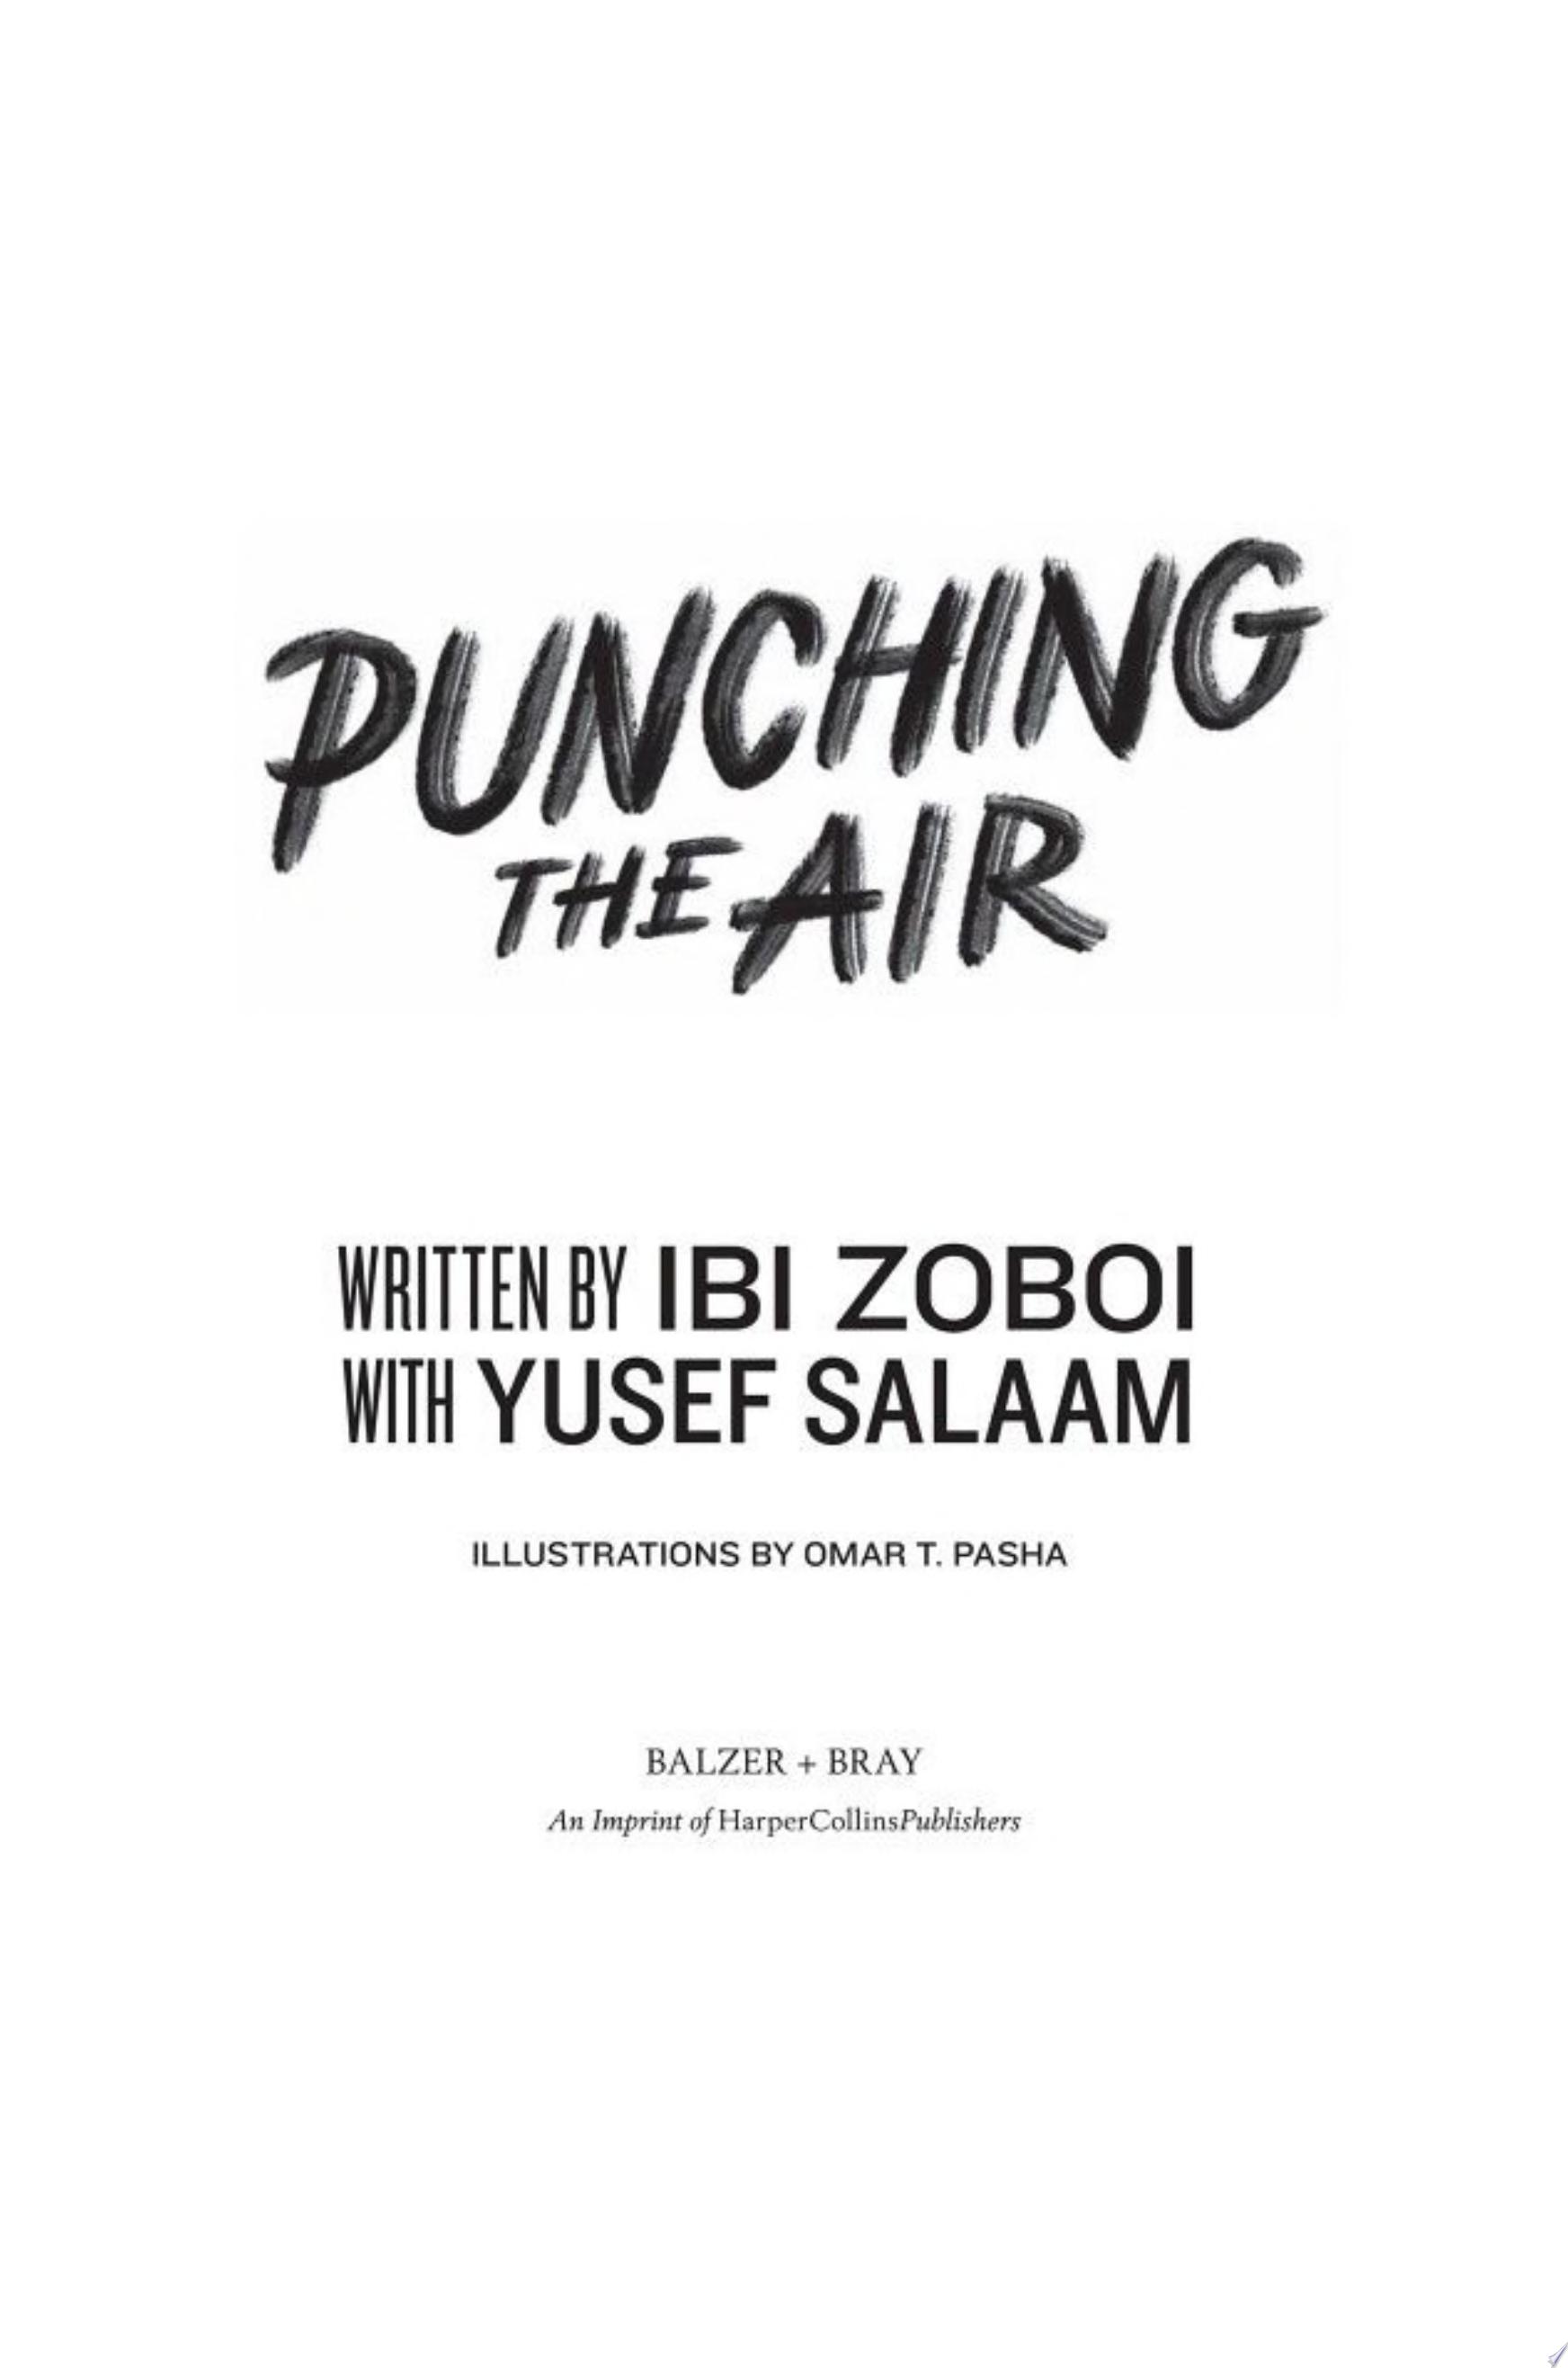 Image for "Punching the Air"